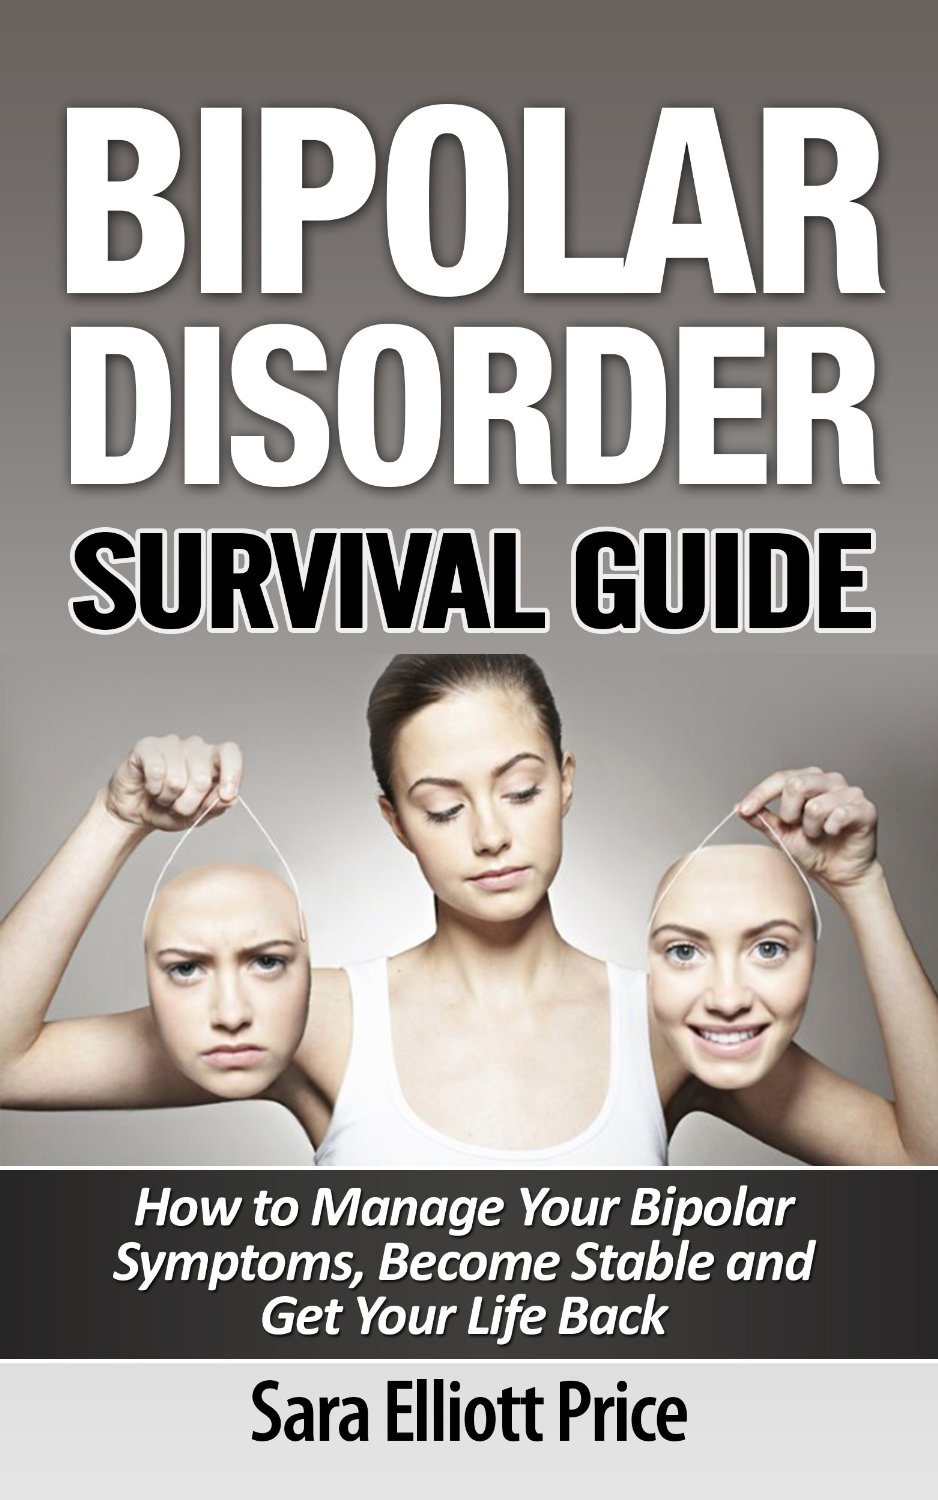 Bipolar Disorder Survival Guide: How to Manage Your Bipolar Symptoms, Become Stable and Get Your Life Back by Sara Elliott Price